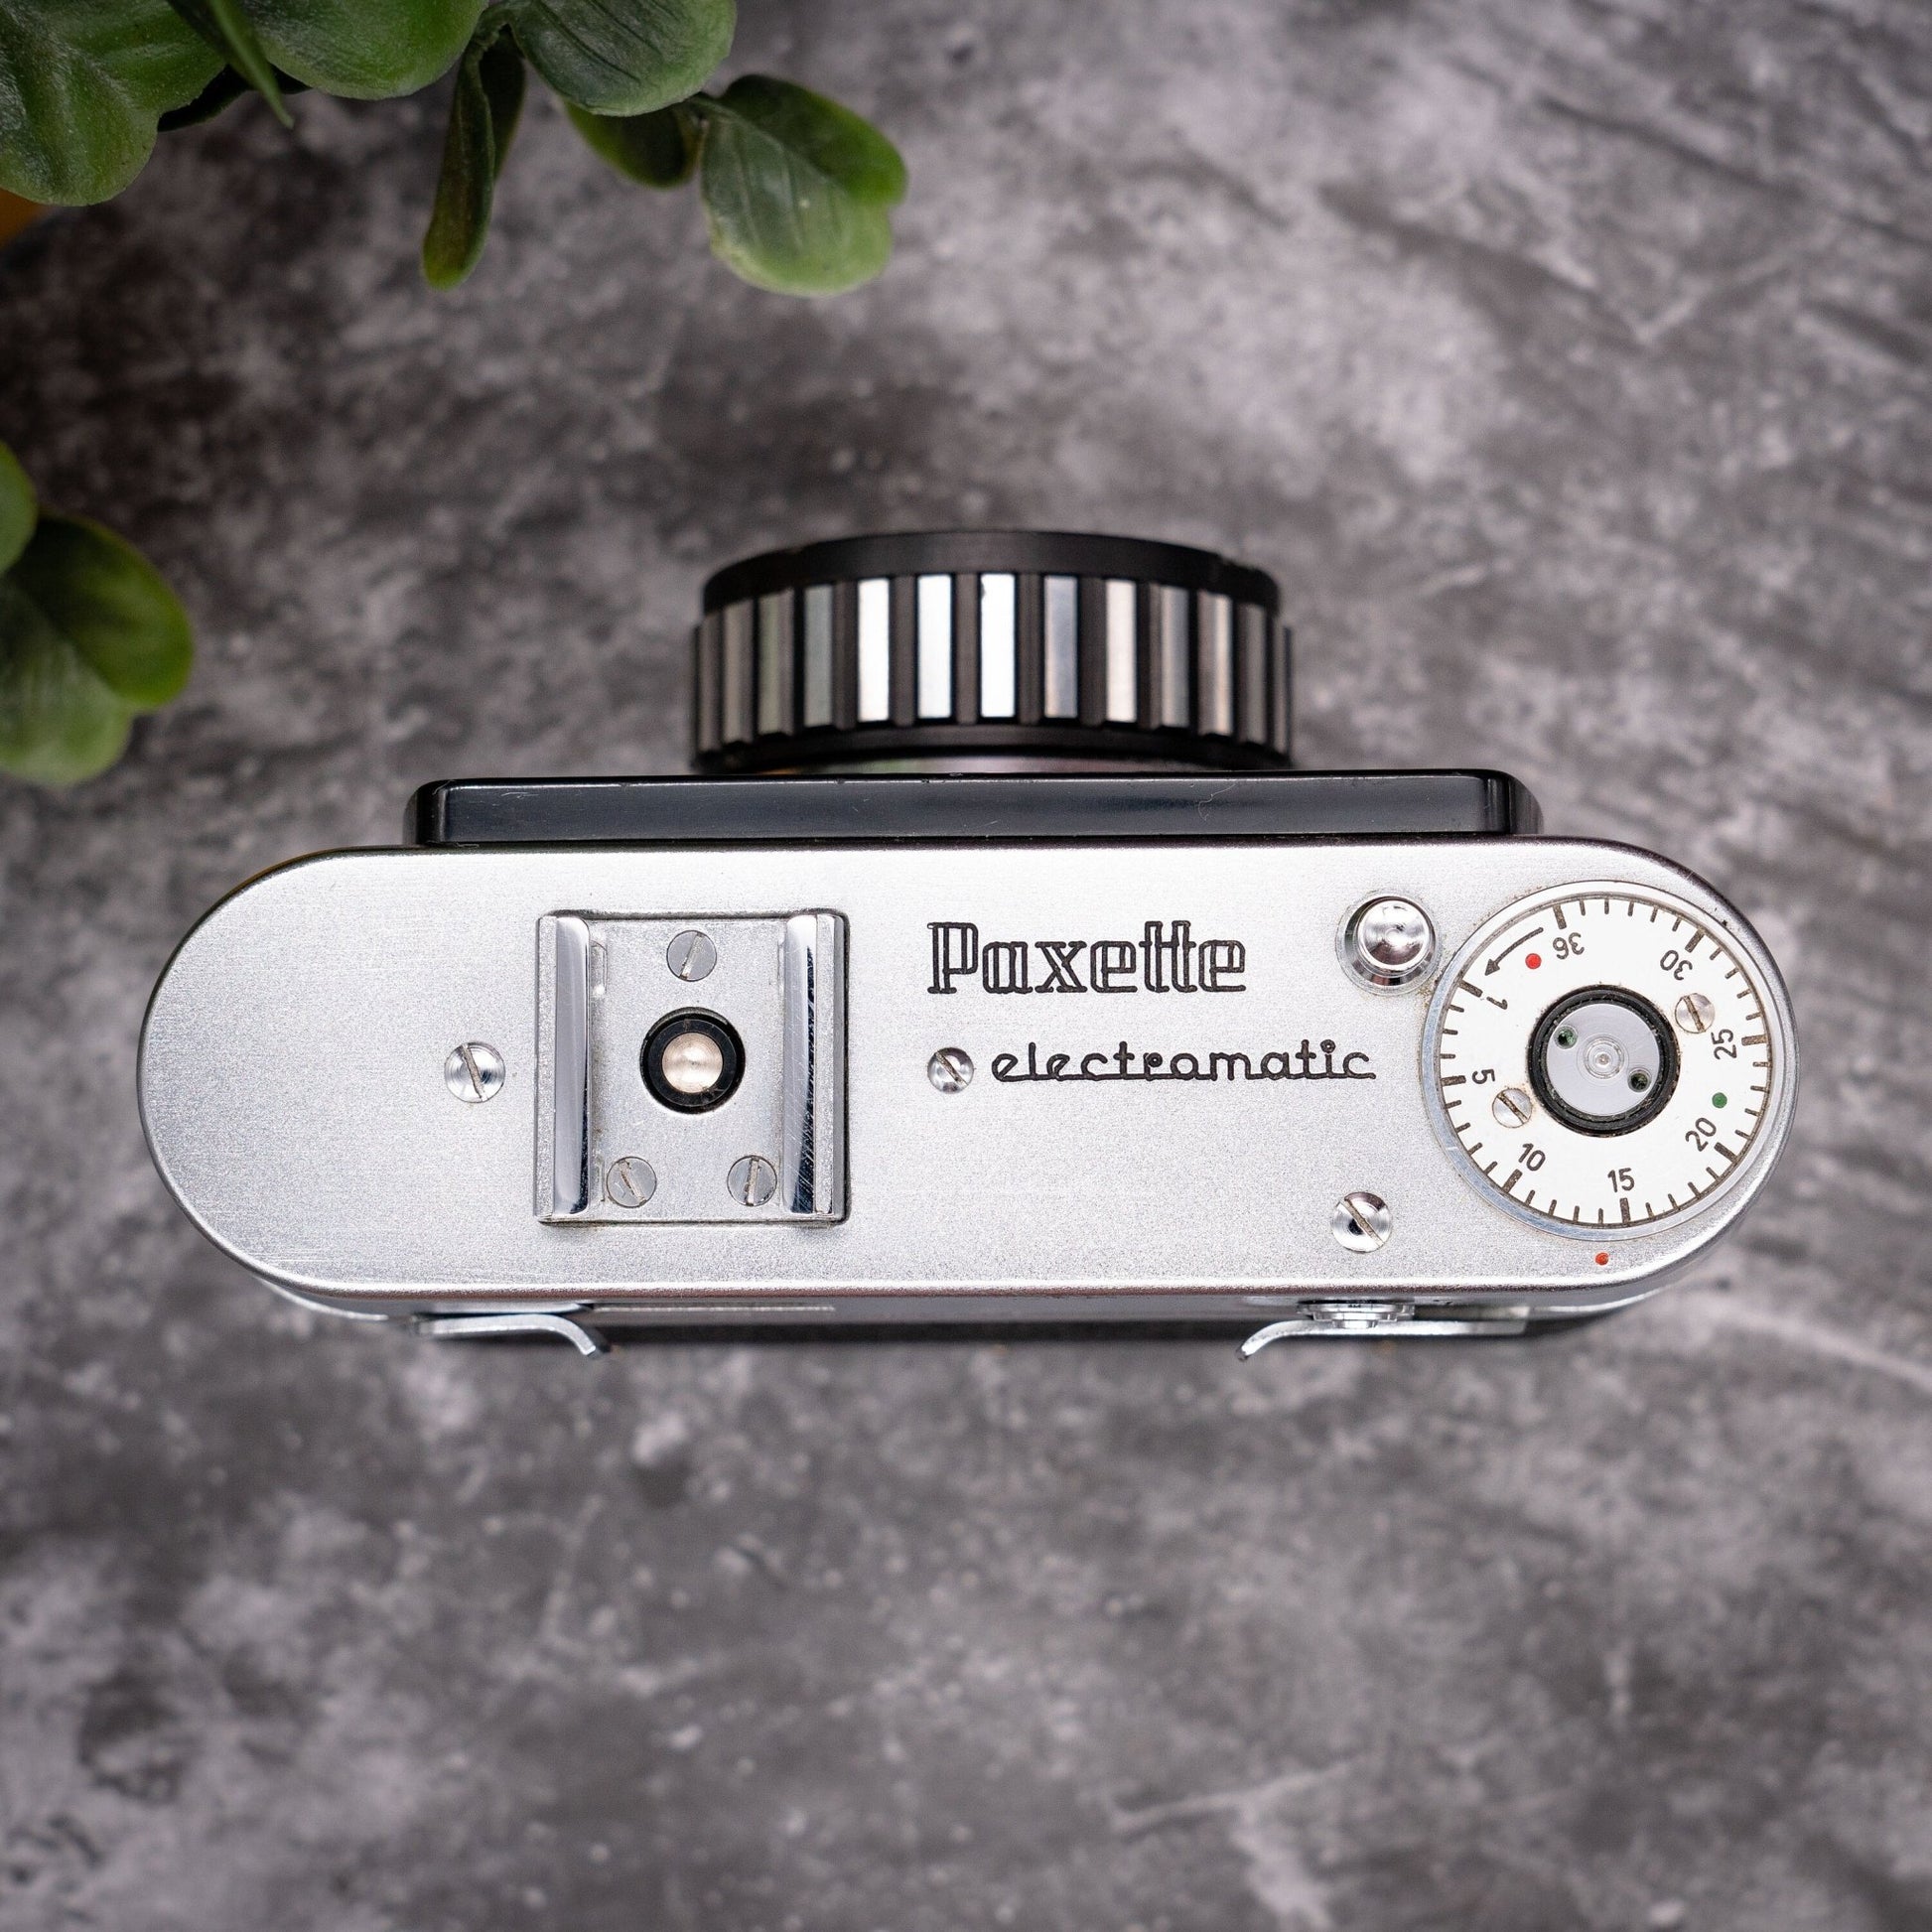 35mm Film Camera Kit | Braun Paxette Electromatic + Roll Of Expired Film - Expired Film Club